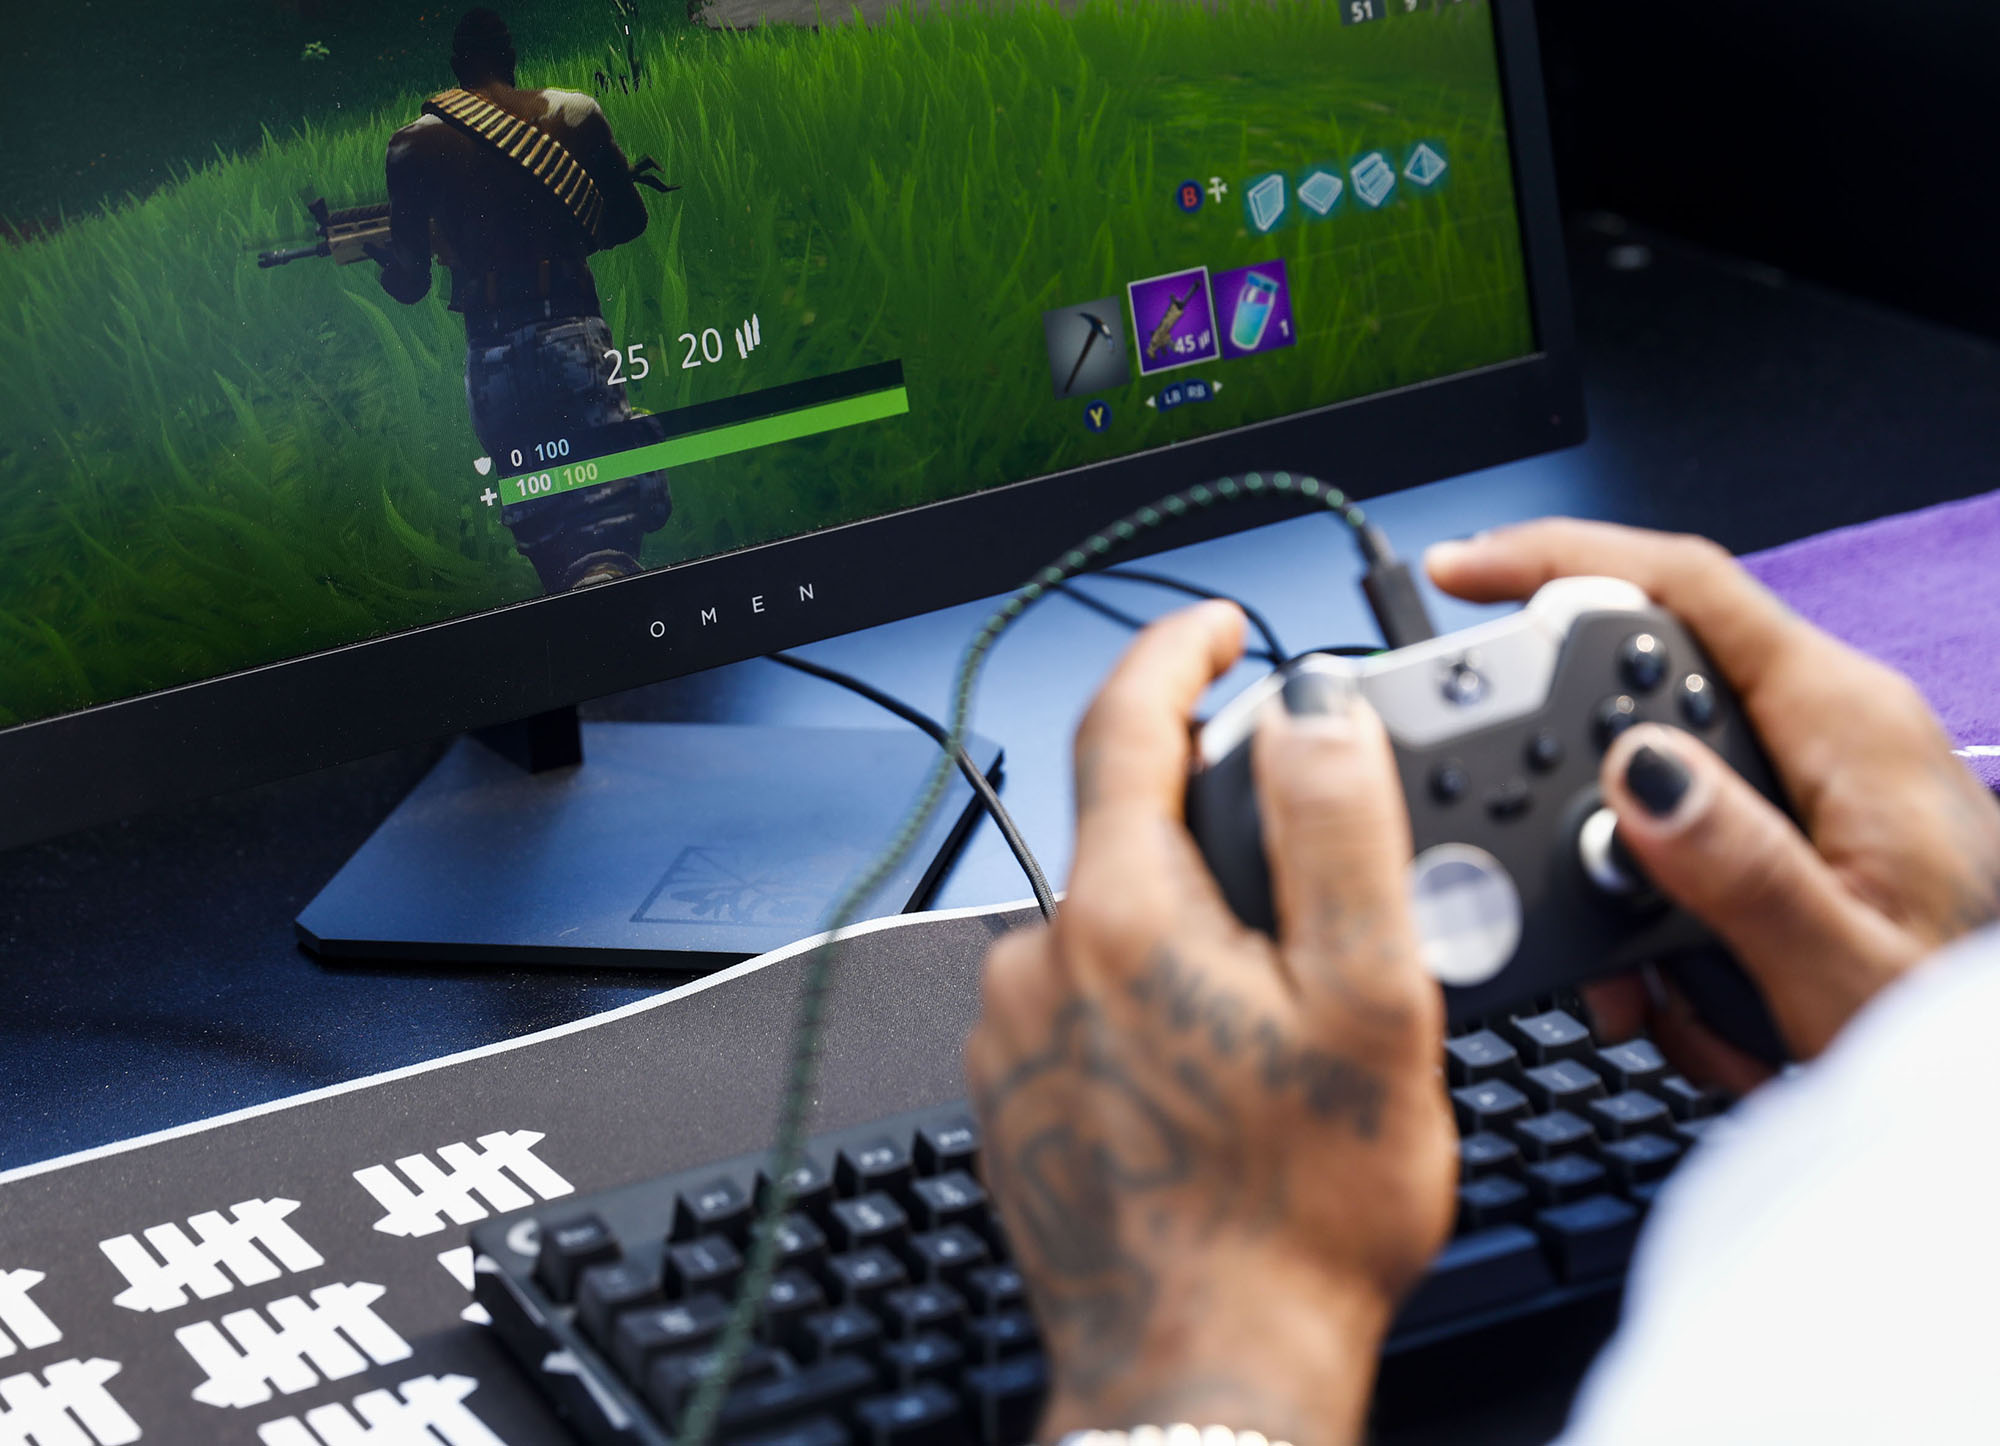 SuperData: Fortnite is now the biggest free-to-play console game ever